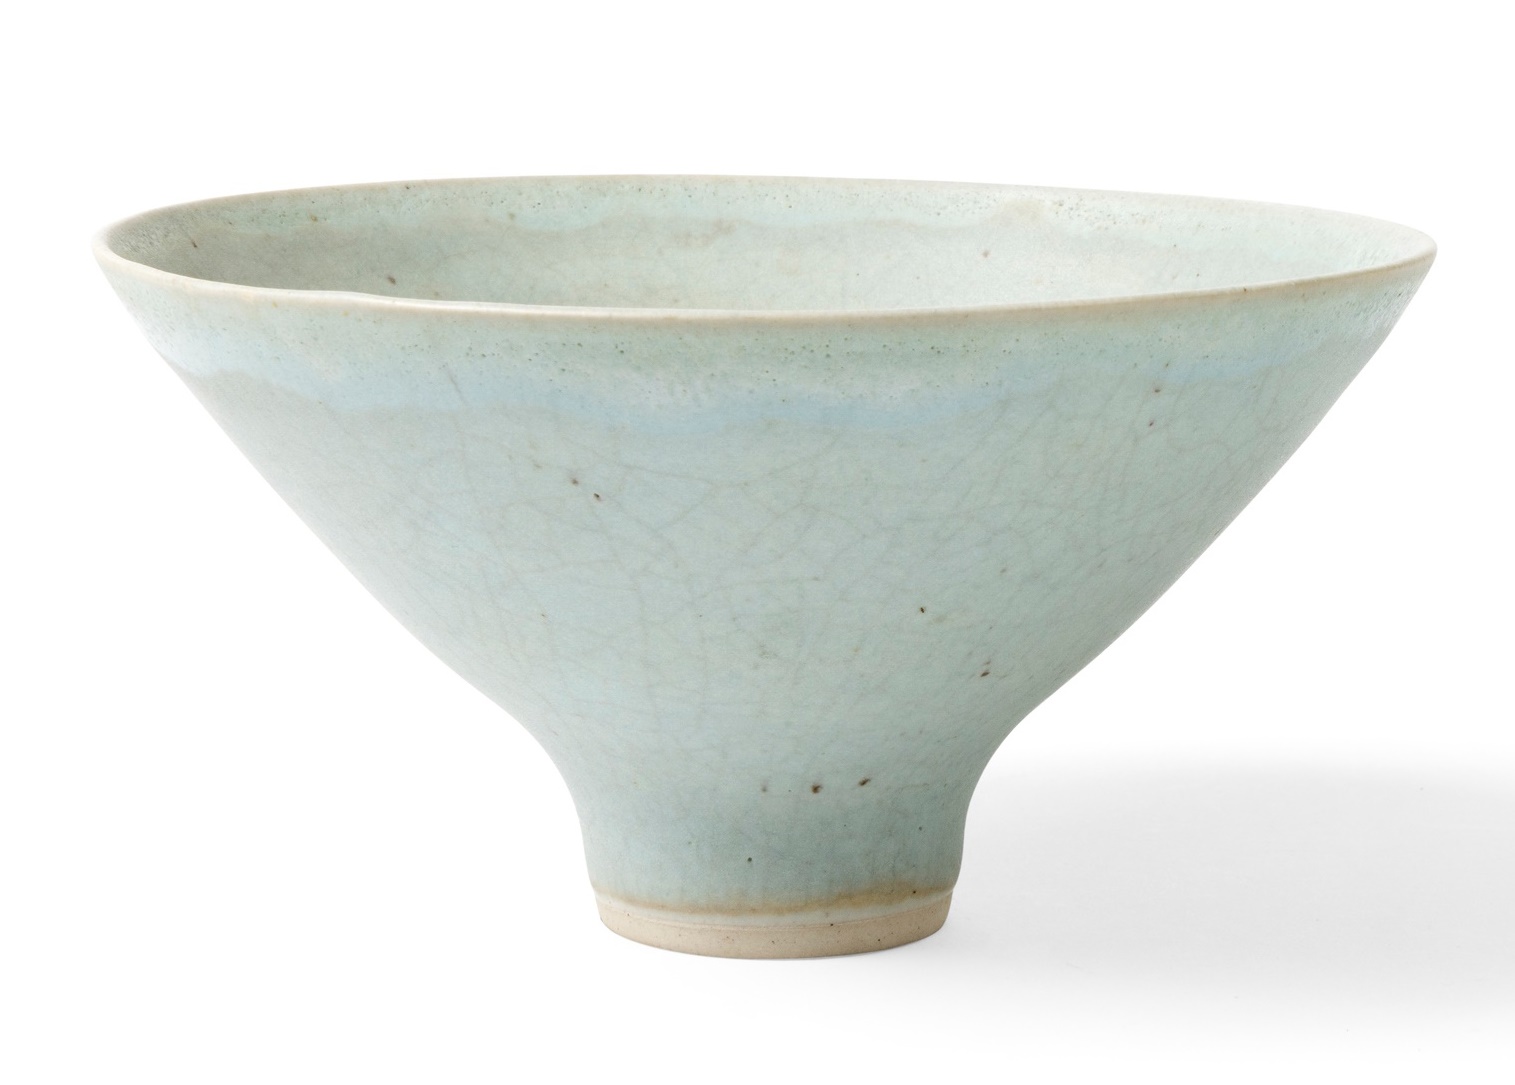 DAME LUCIE RIE (BRITISH 1902-1995) | FOOTED BOWL | Sold for £9,450*